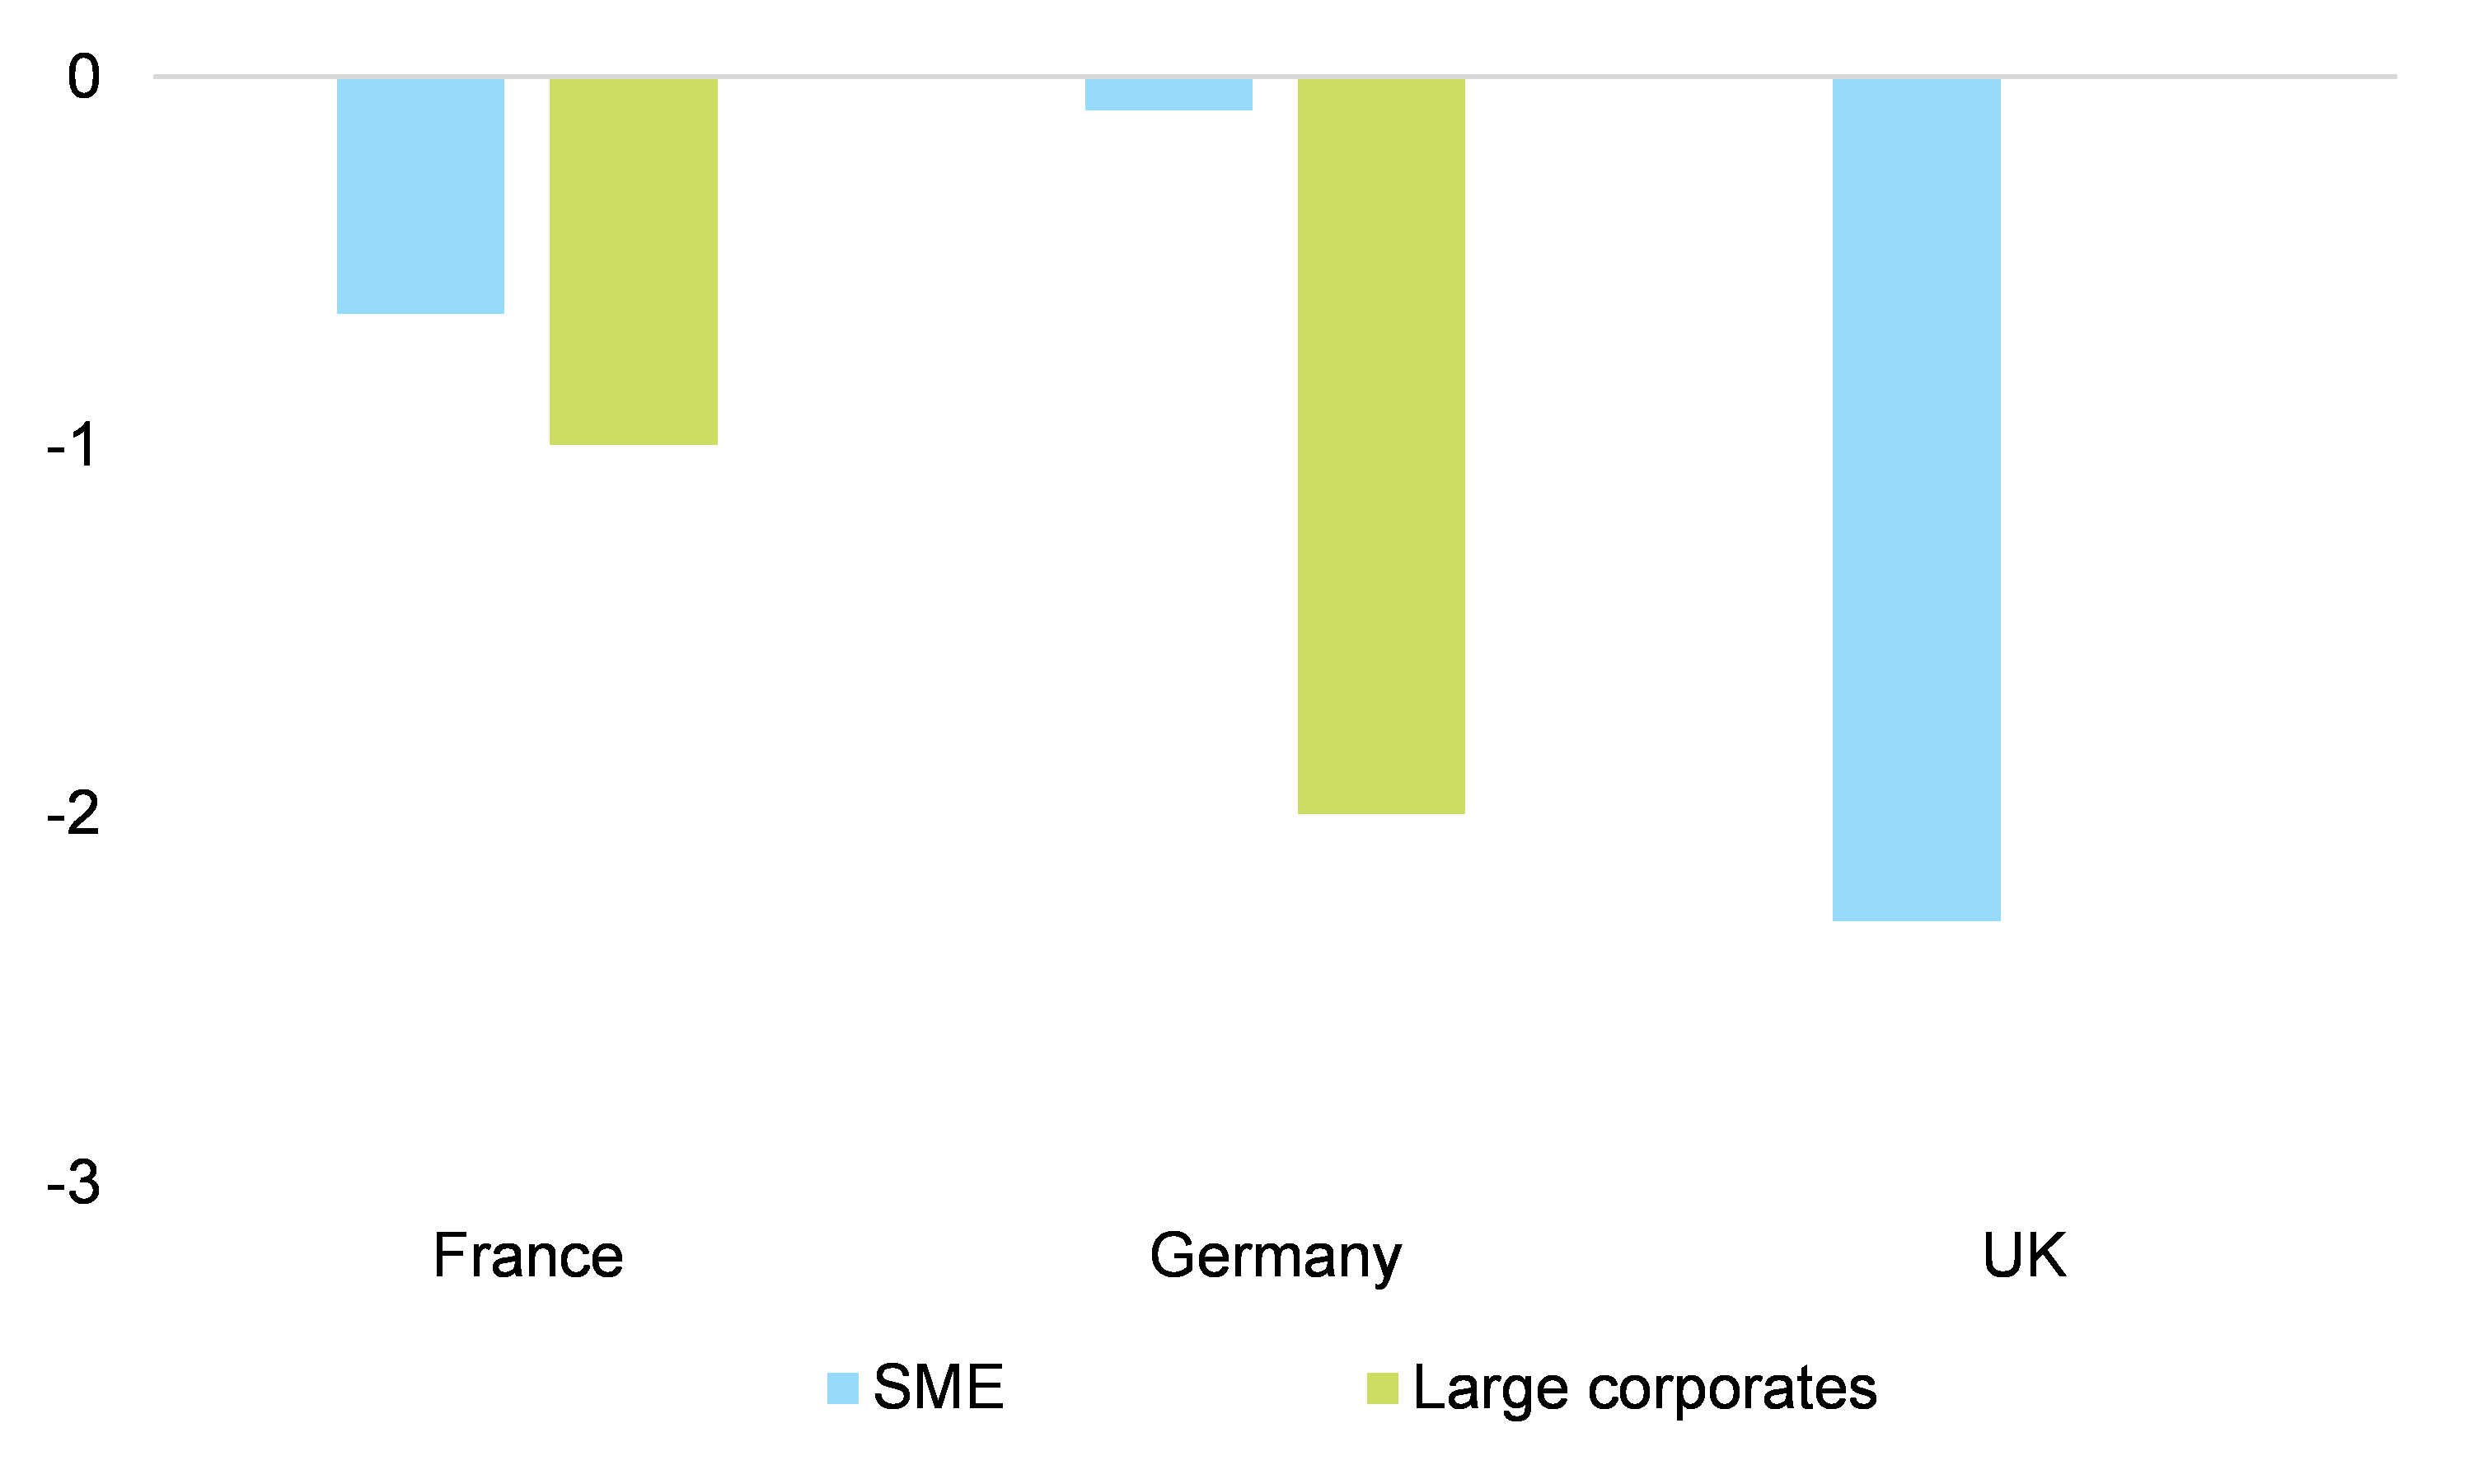 Figure 6 – DSO, change in 2020, SMEs vs large corporates